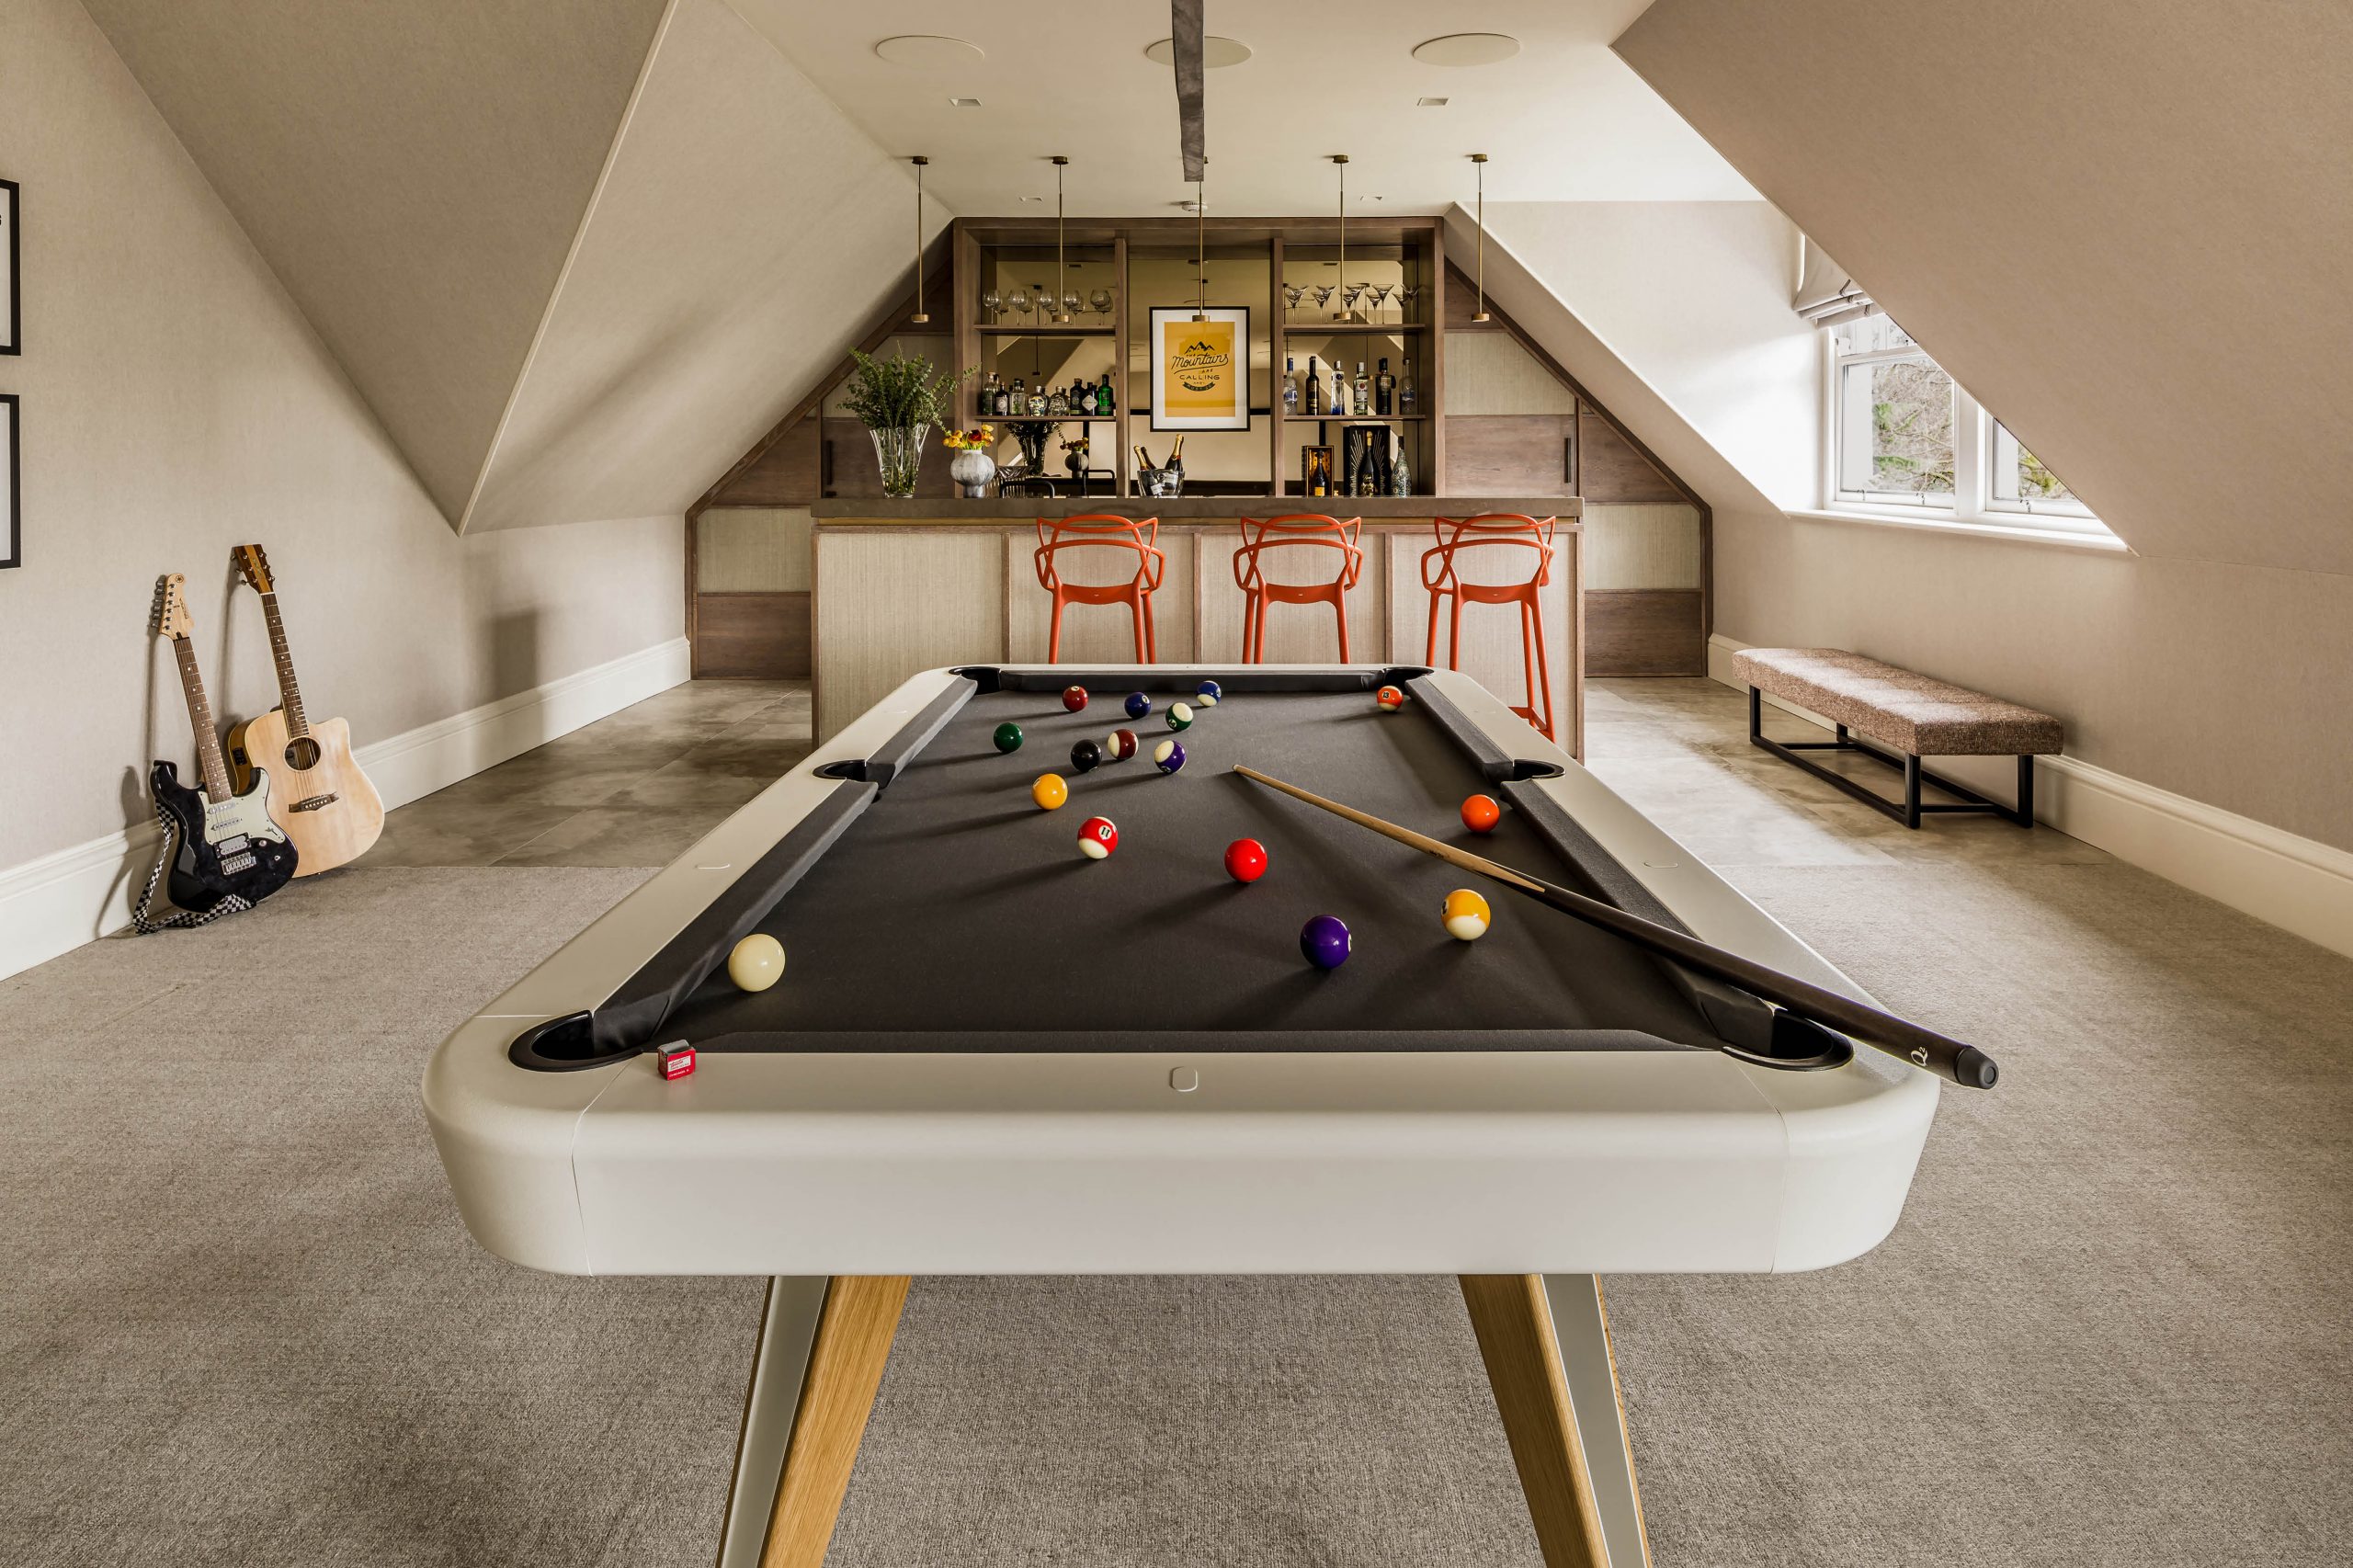 Games room and pool table